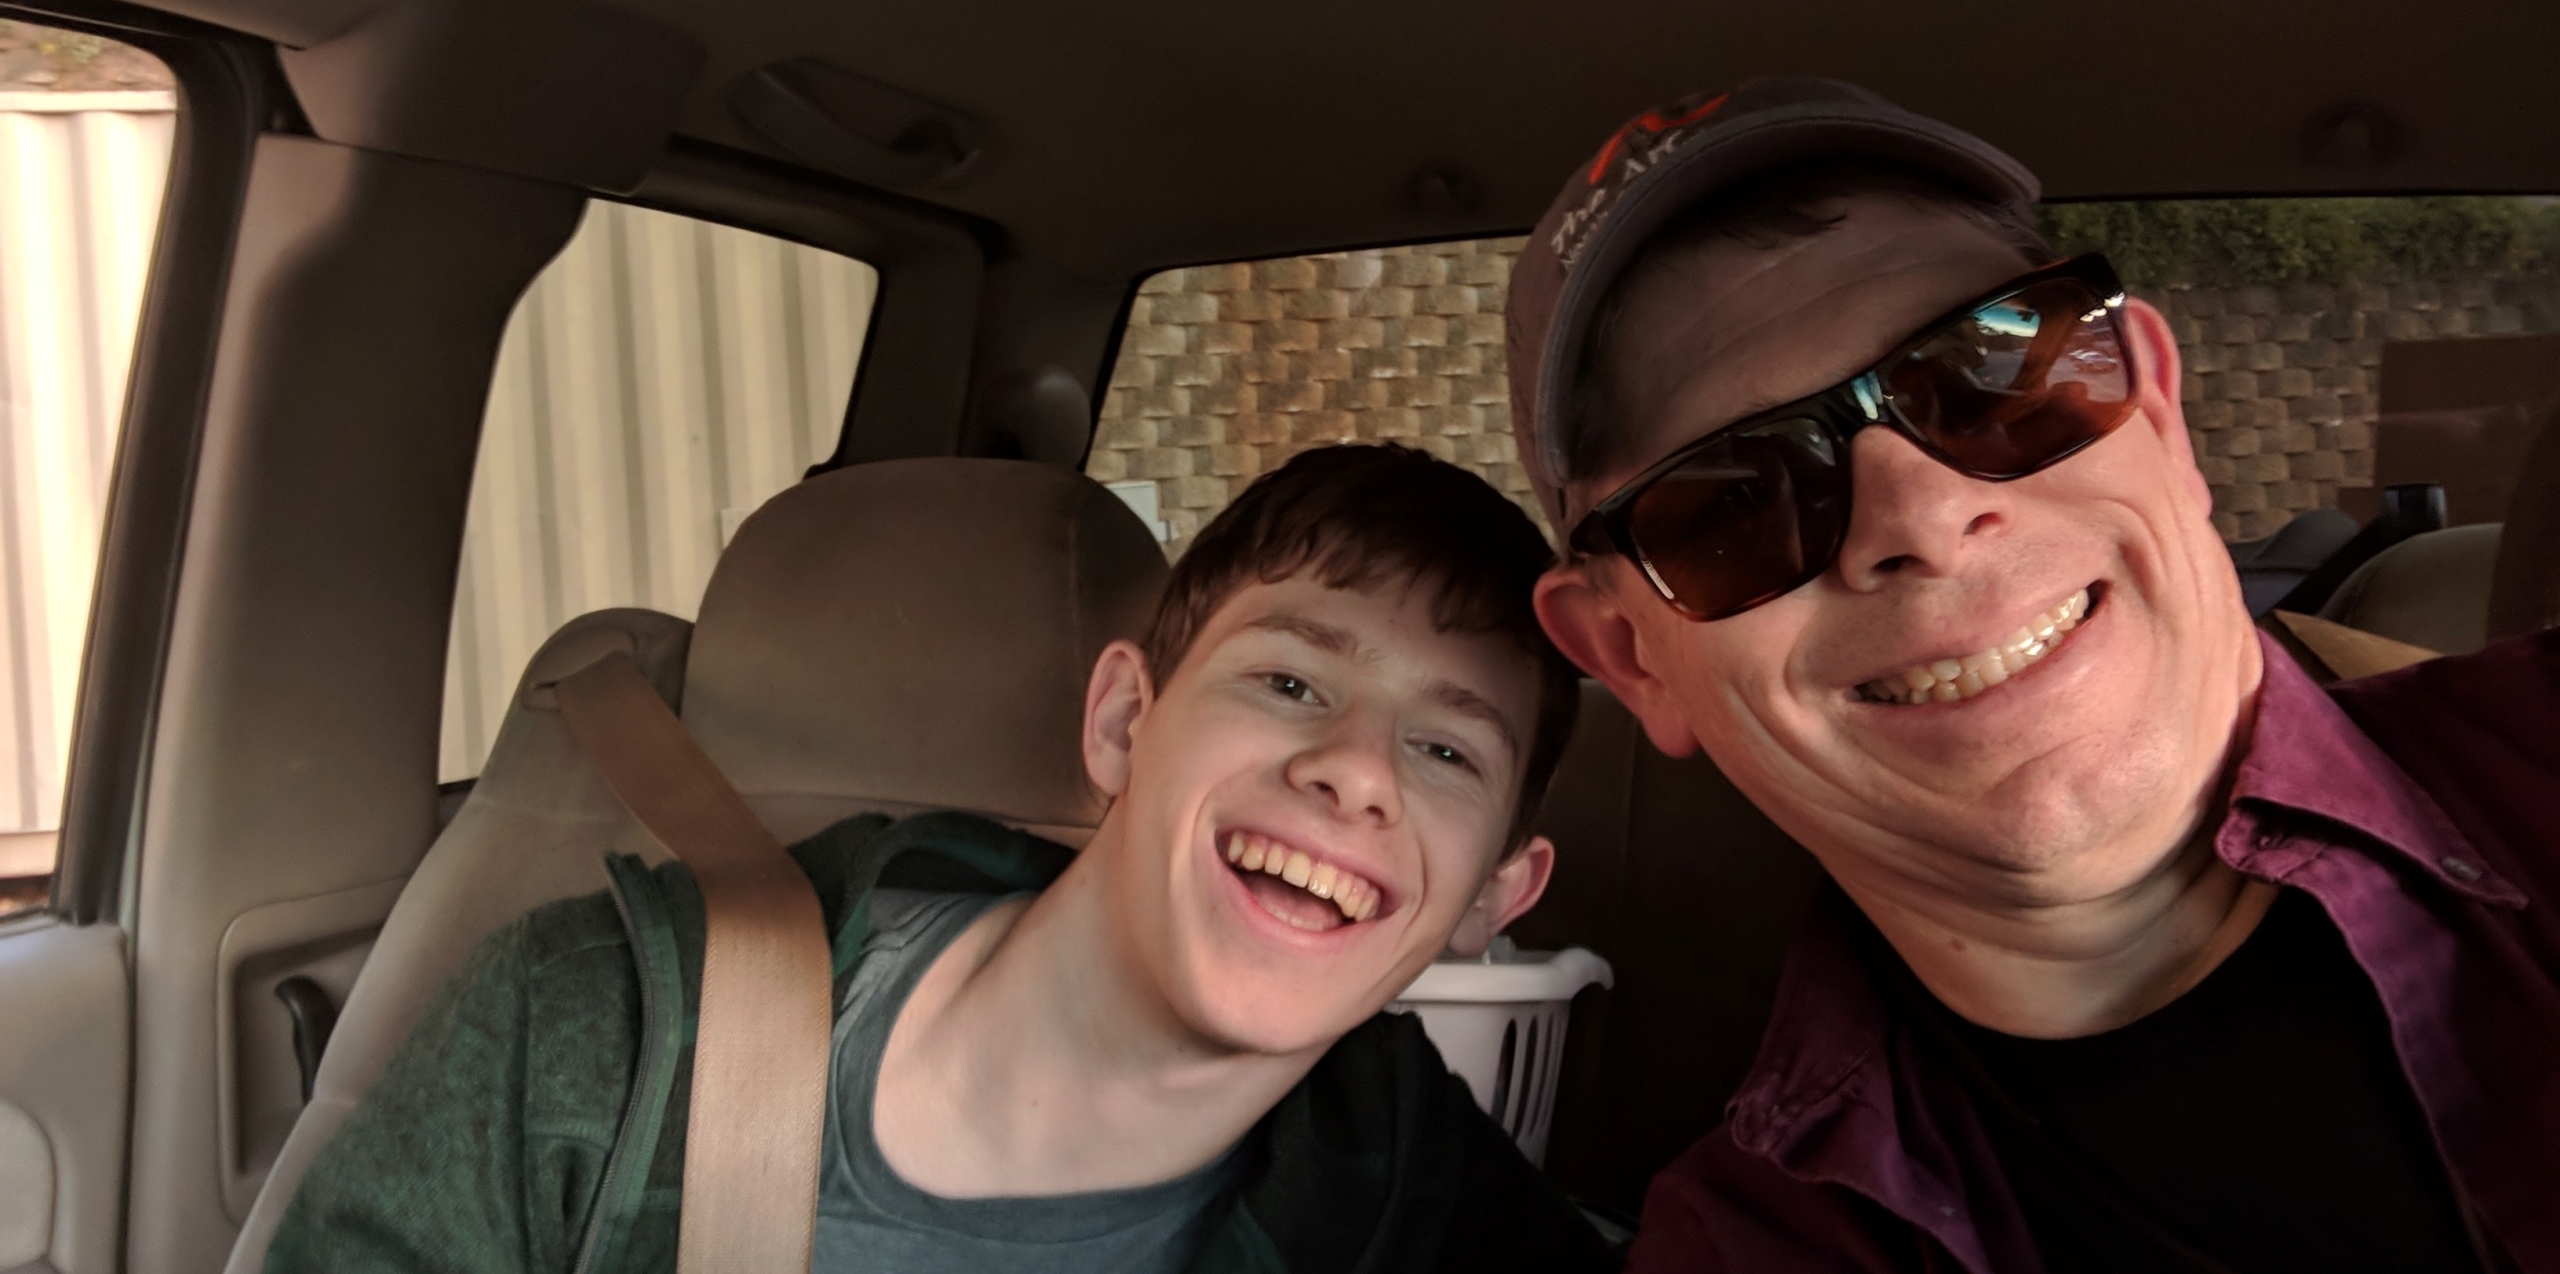 A selfie of a father and his teenage son, sitting in a car and smiling. The father is wearing sunglasses.